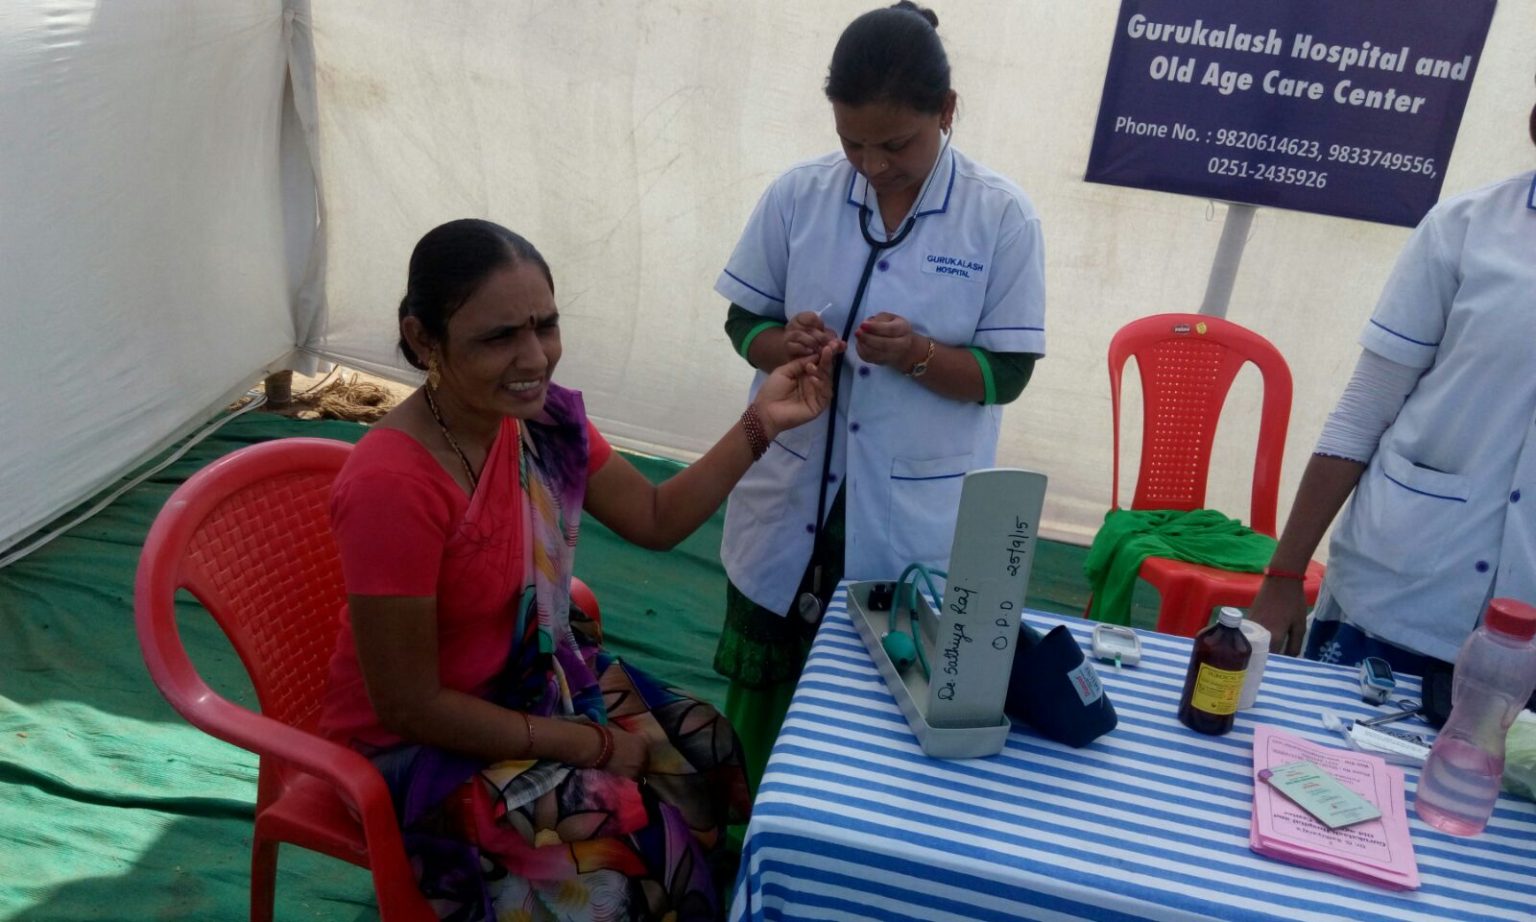 a health checkup camp was organised for senior citizens